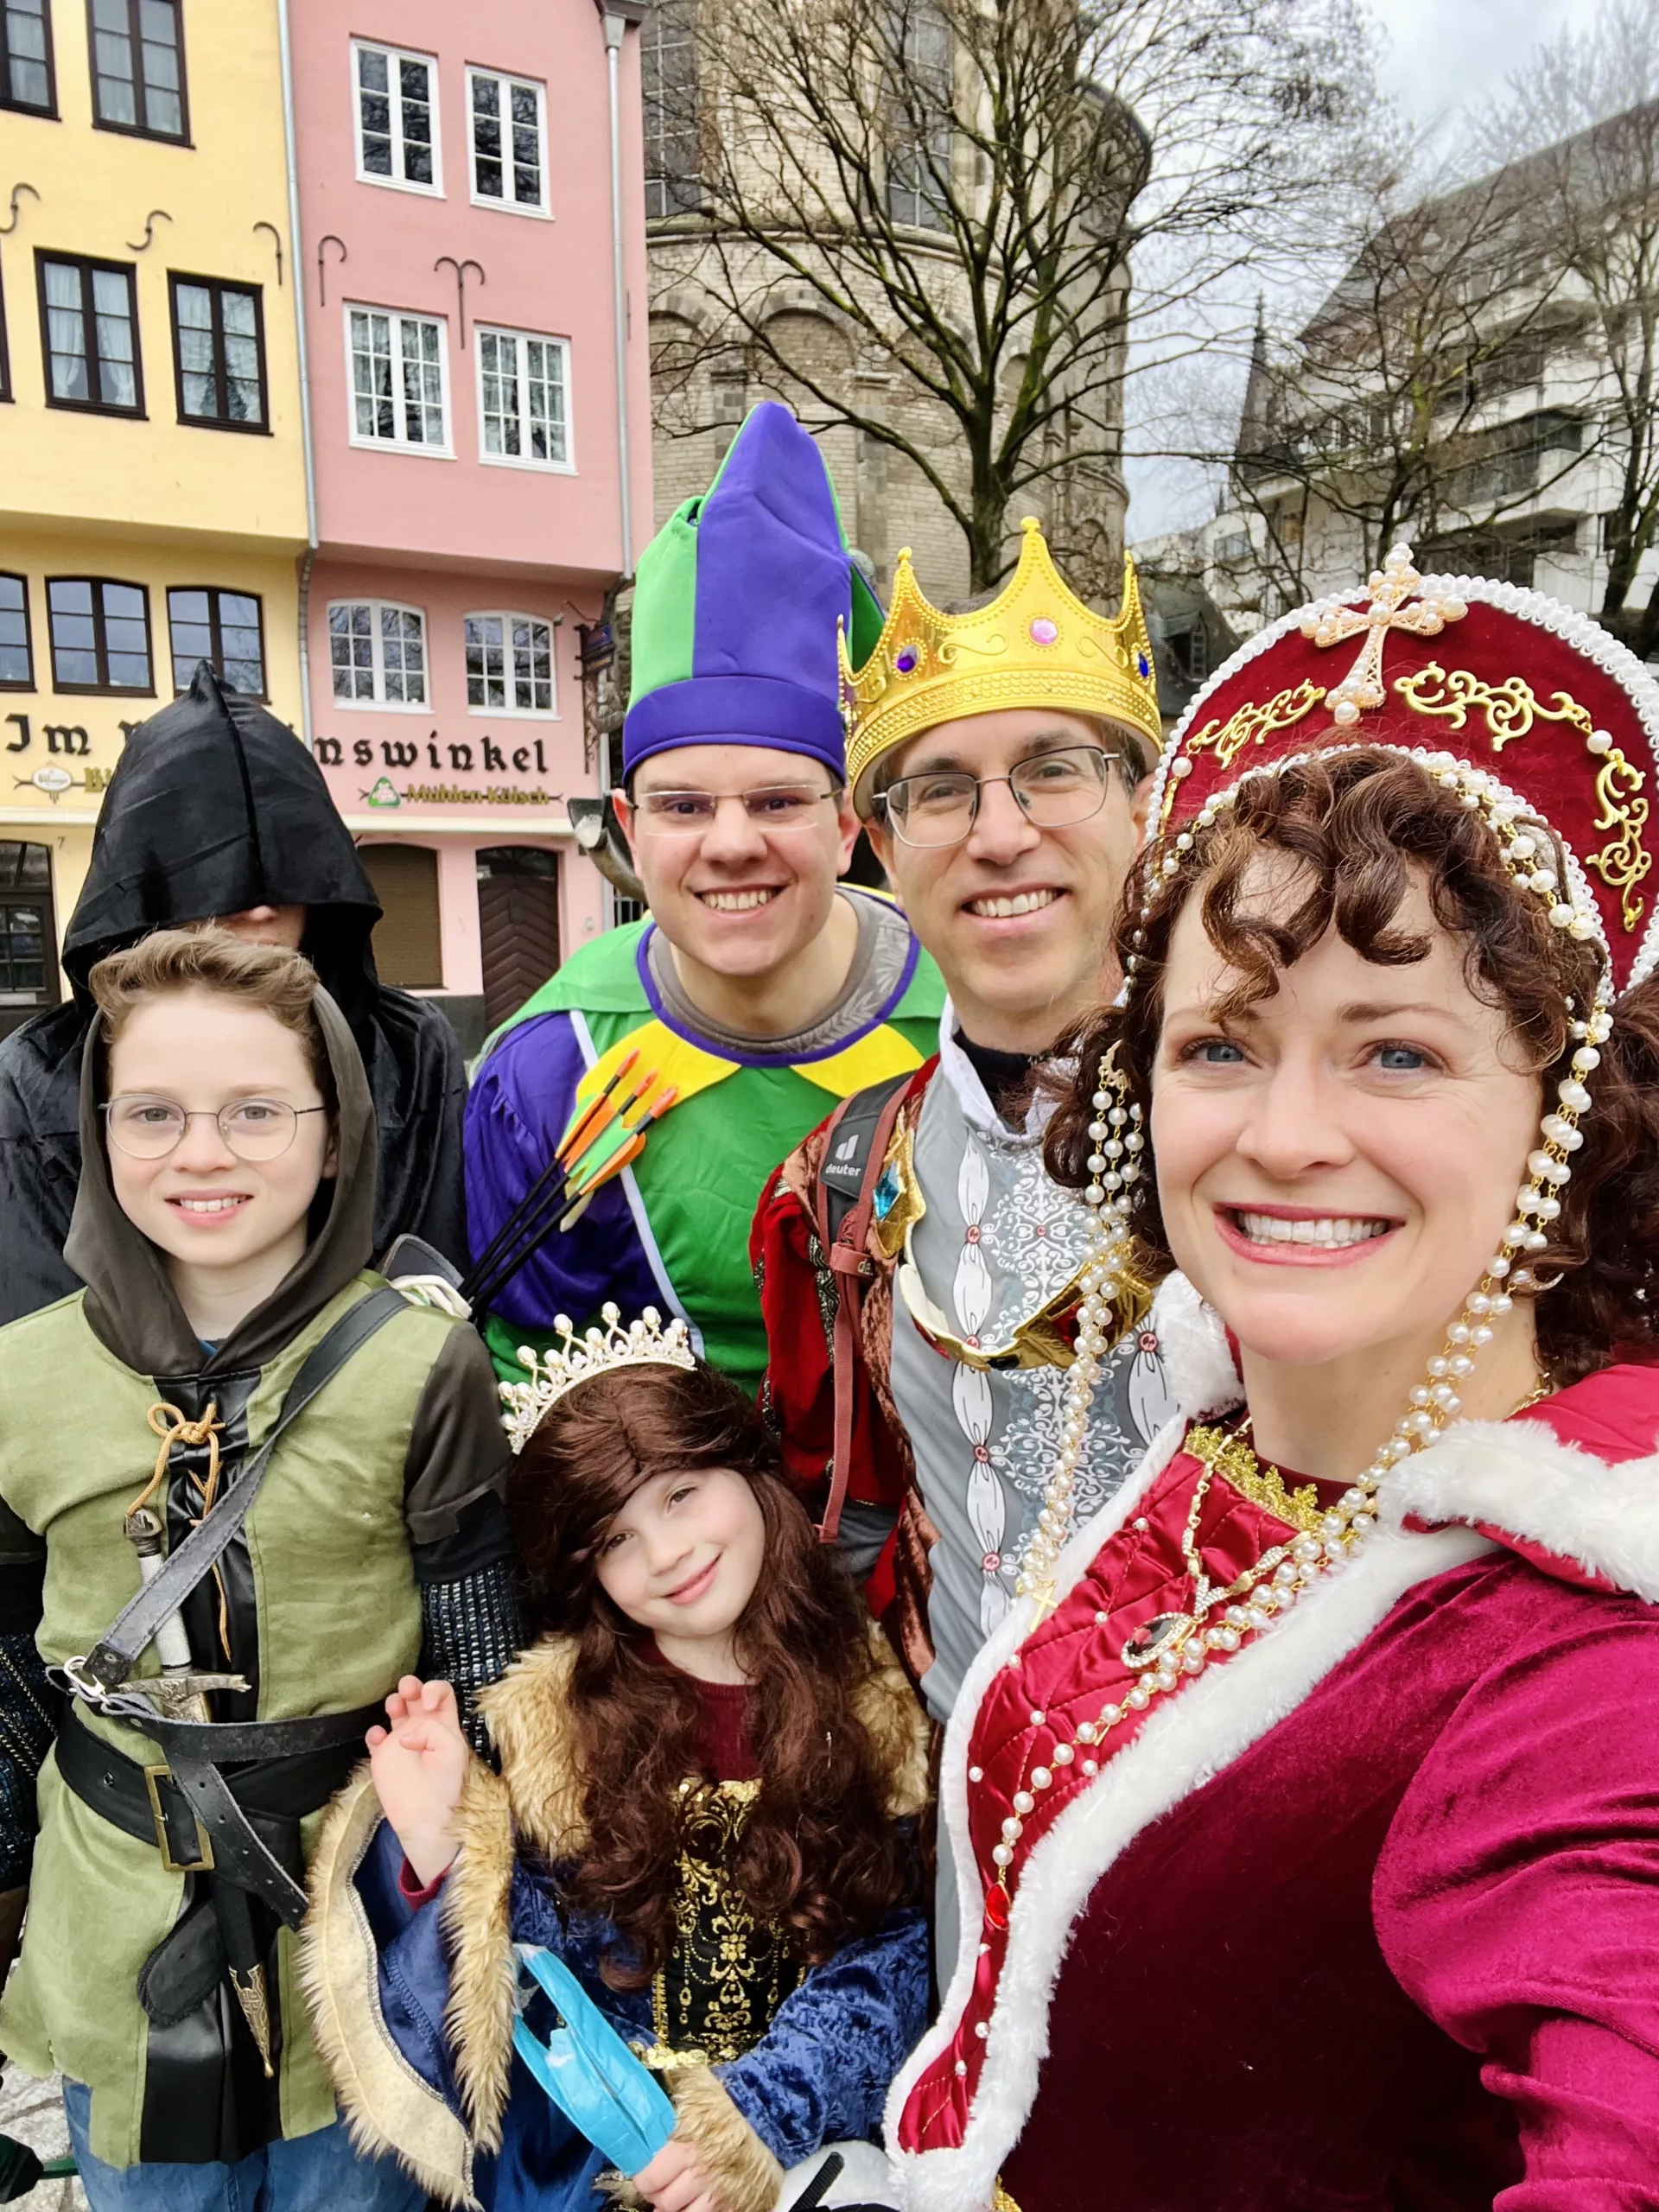 Carnival In Cologne, Germany - We experienced the 200th anniversary and it was a once in a lifetime experience!